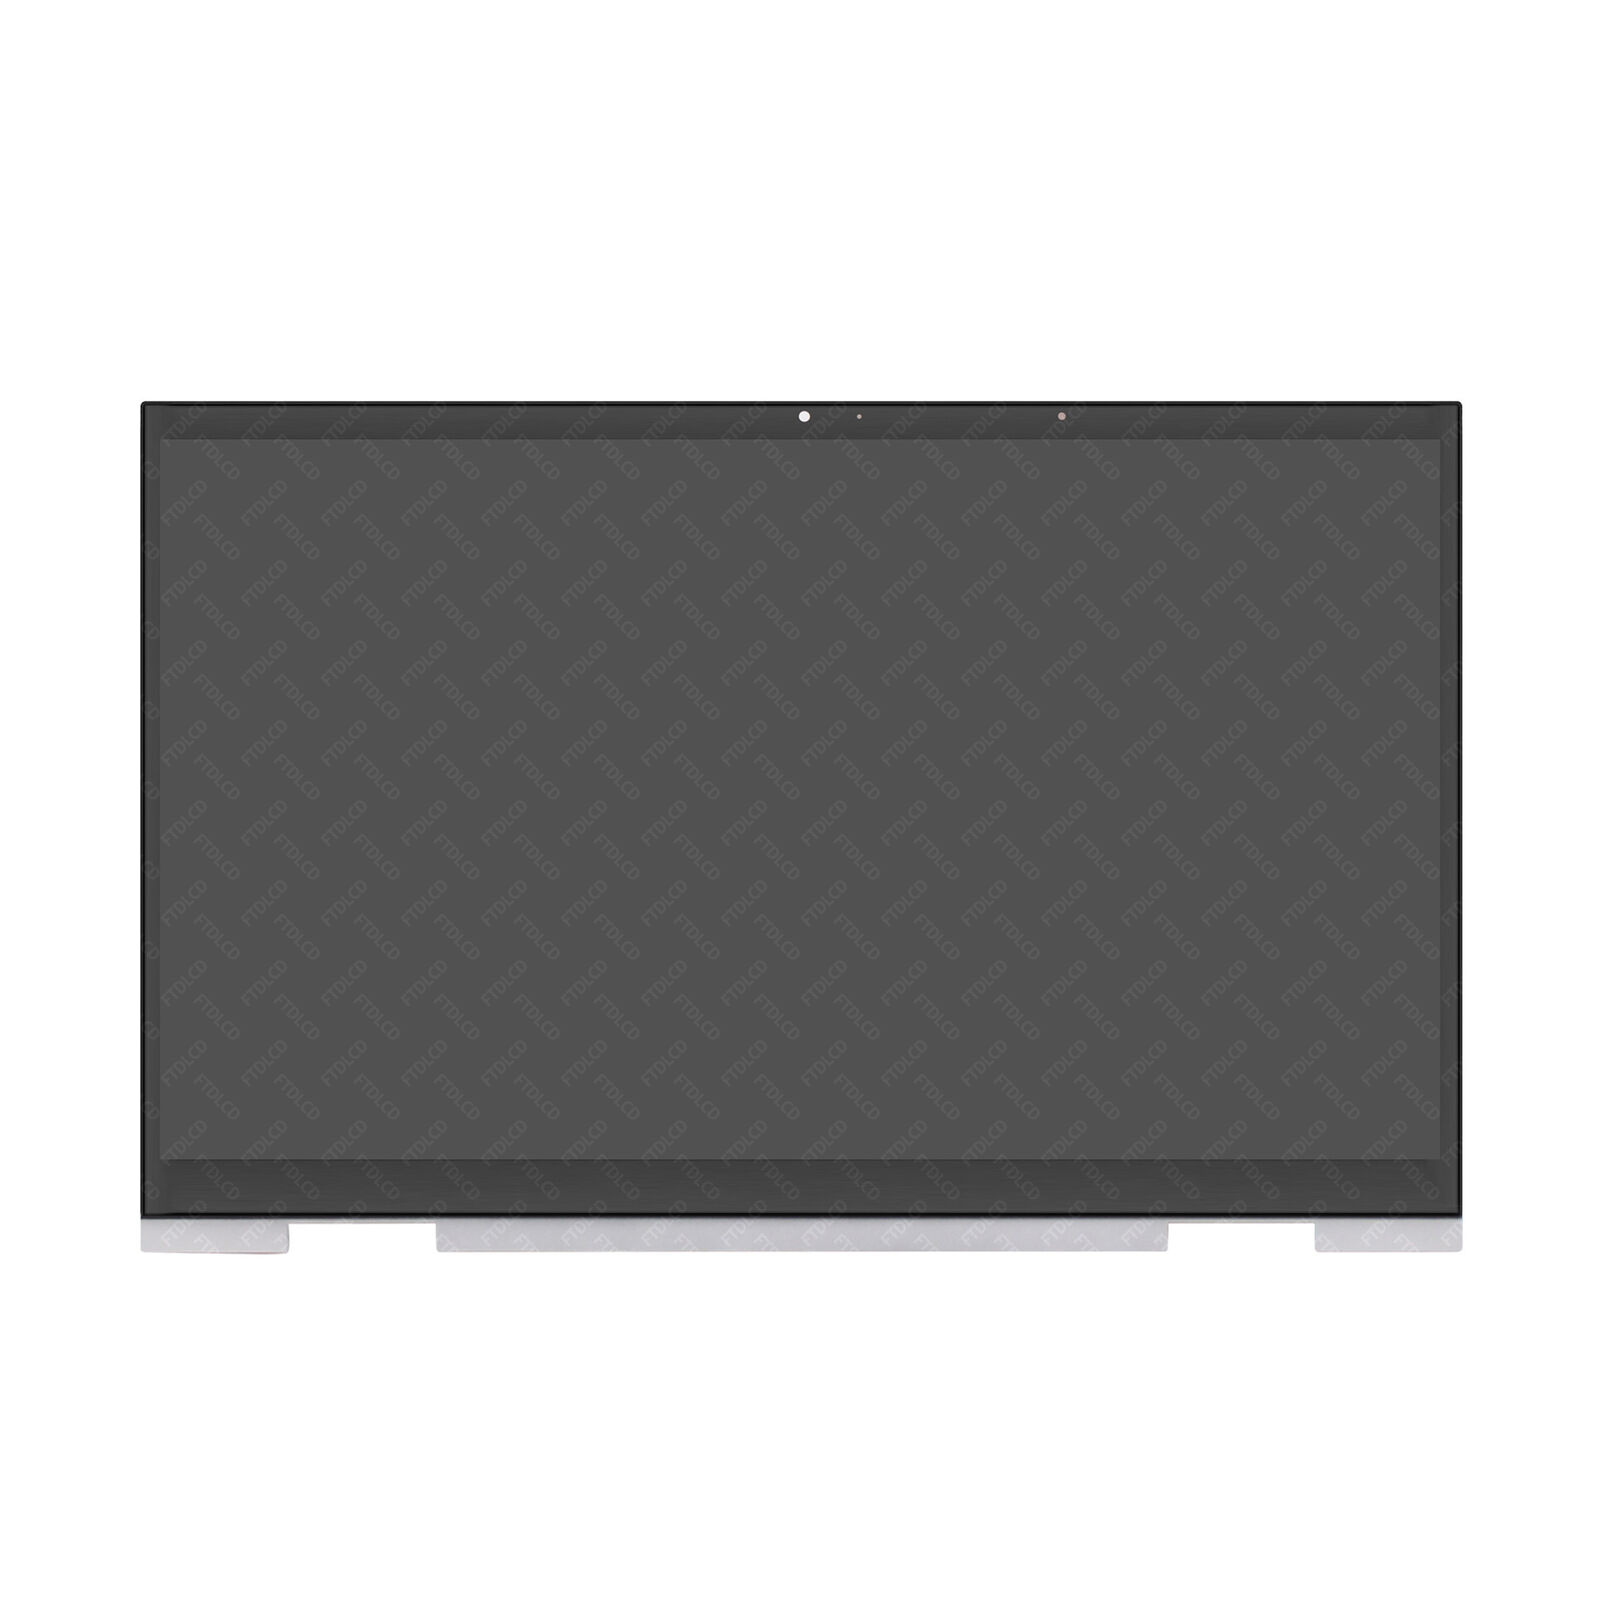 M45452-001 LCD Touch Screen Display Assembly+Bezel for HP ENVY X360 15M-ES0013DX